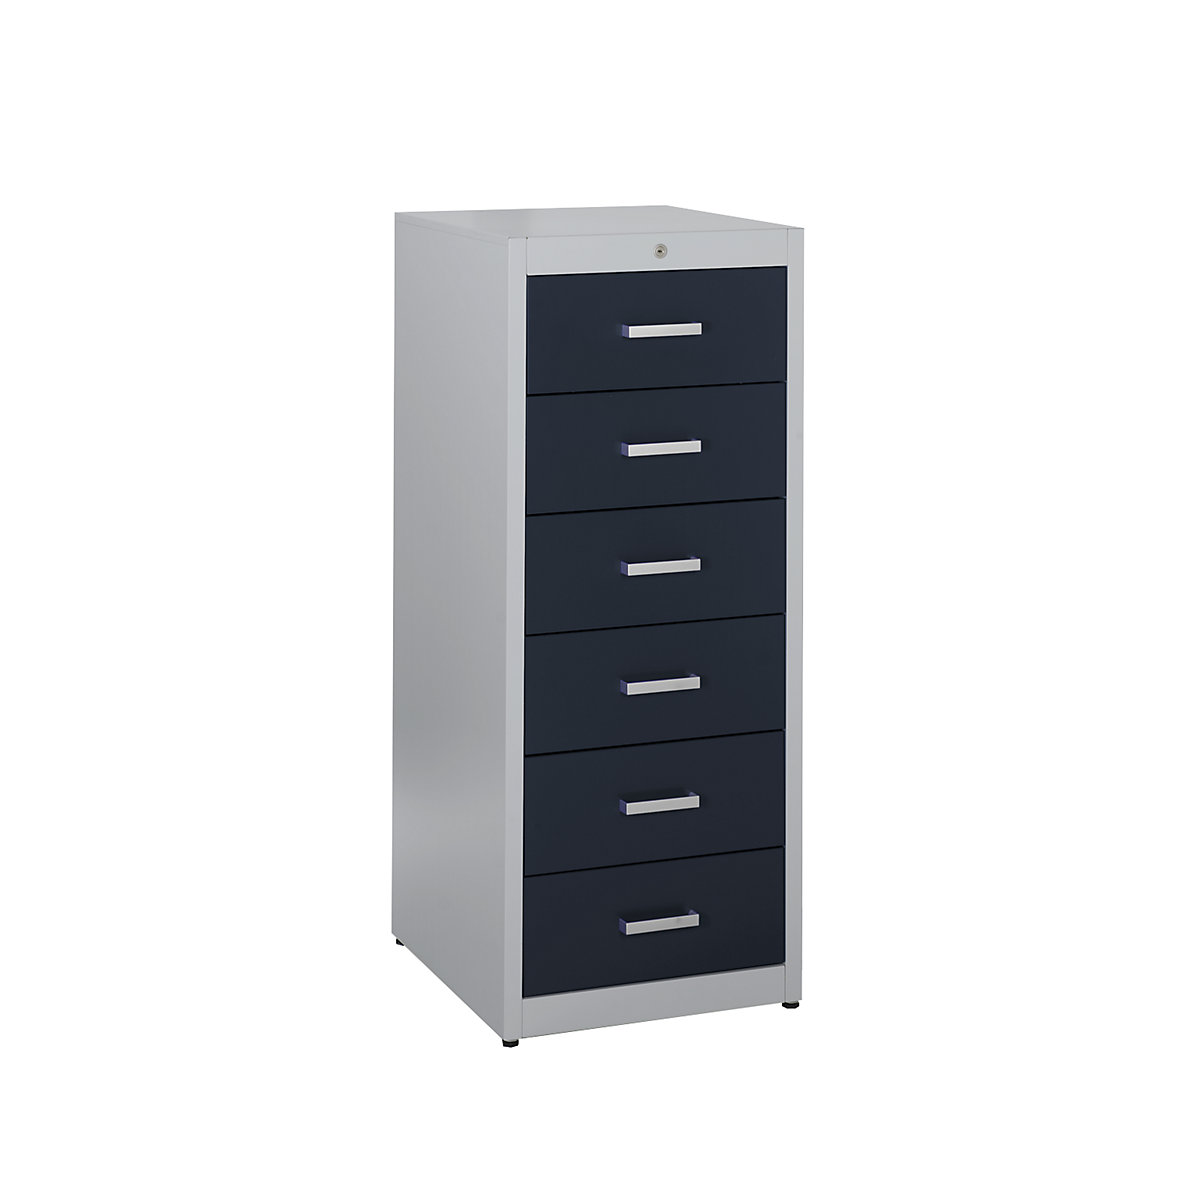 Card file cabinet, bar handles – mauser, 6 drawers, standard retraction mechanism, 2-track, white aluminium / charcoal-7